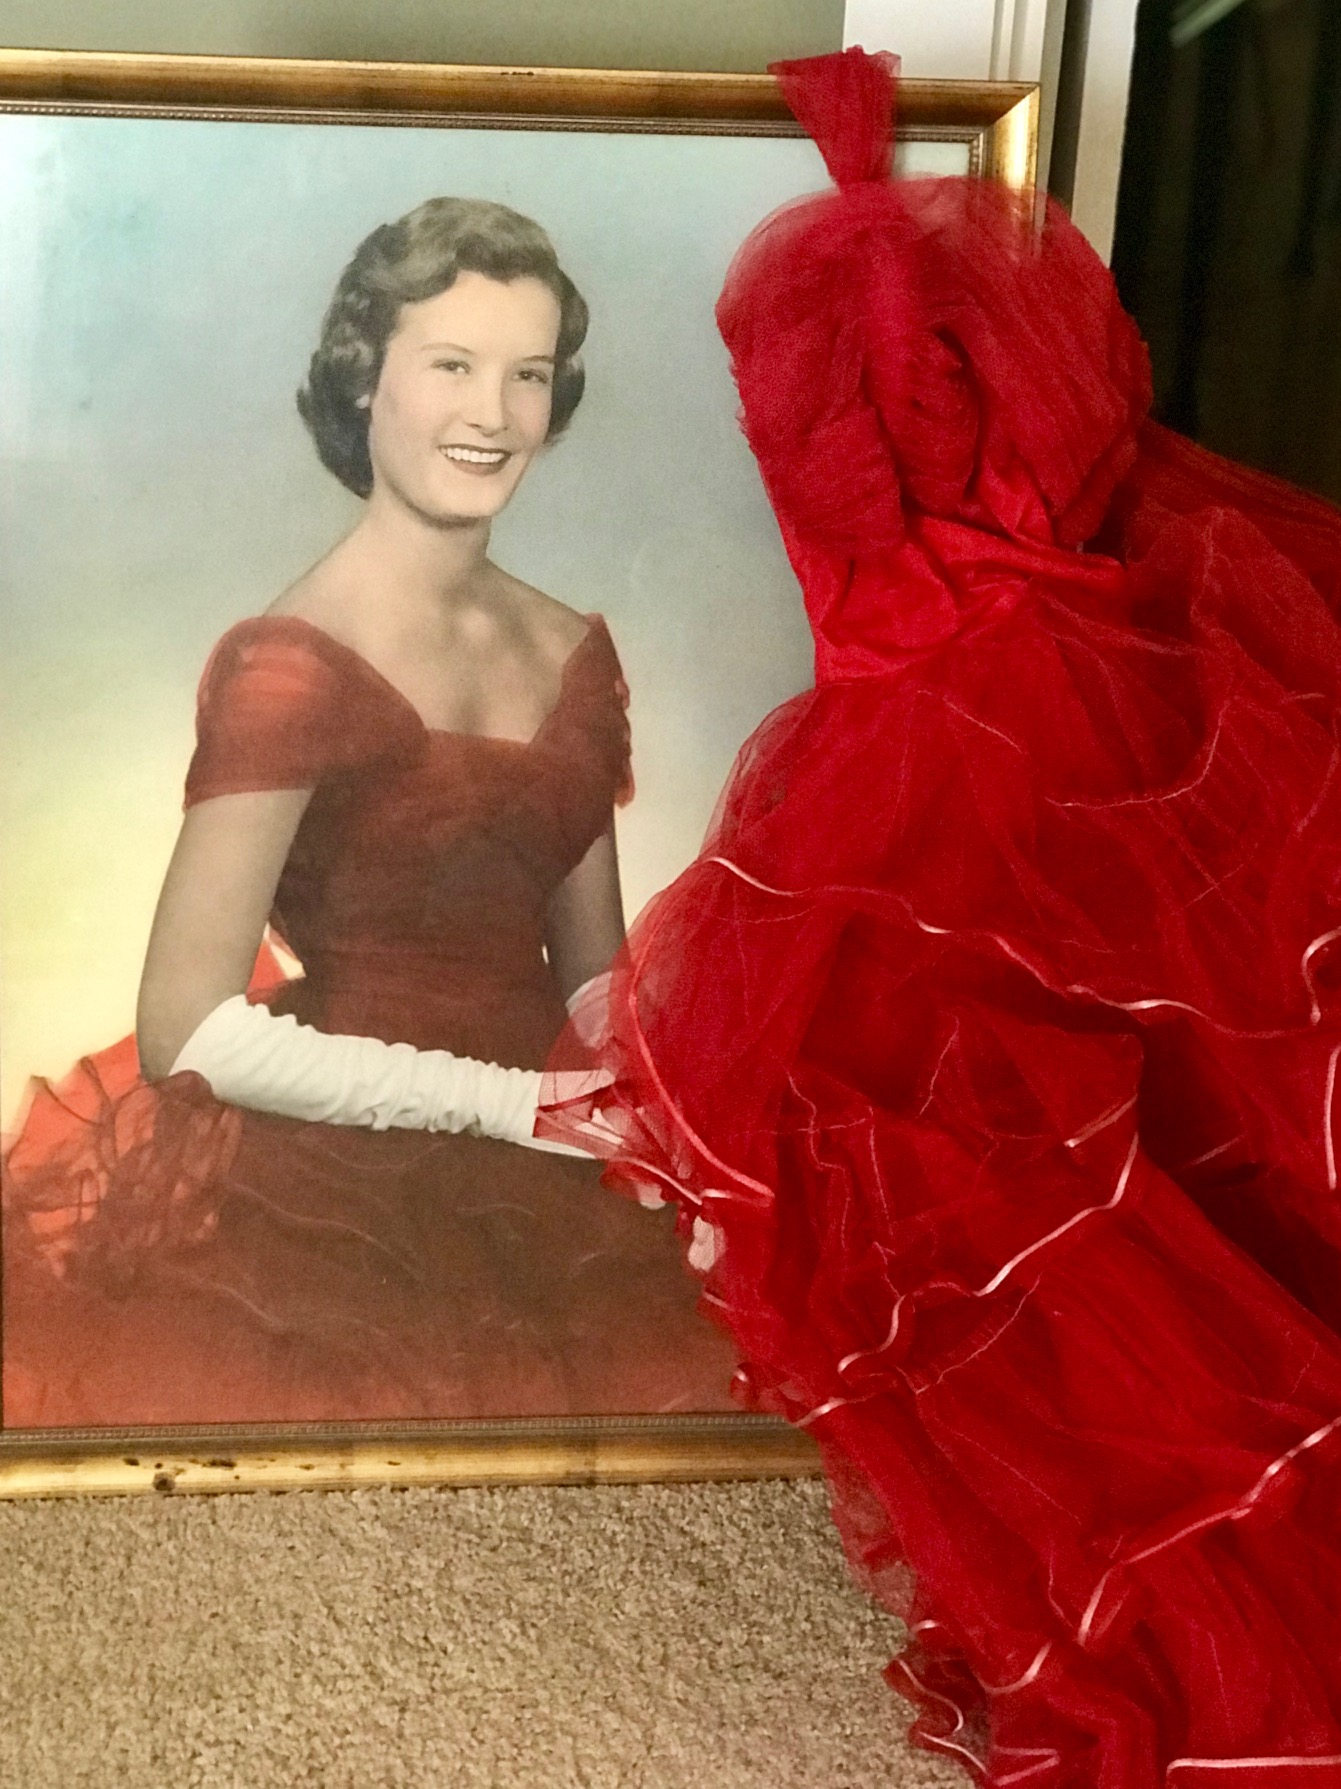 The Red Dress Story - Nanahood